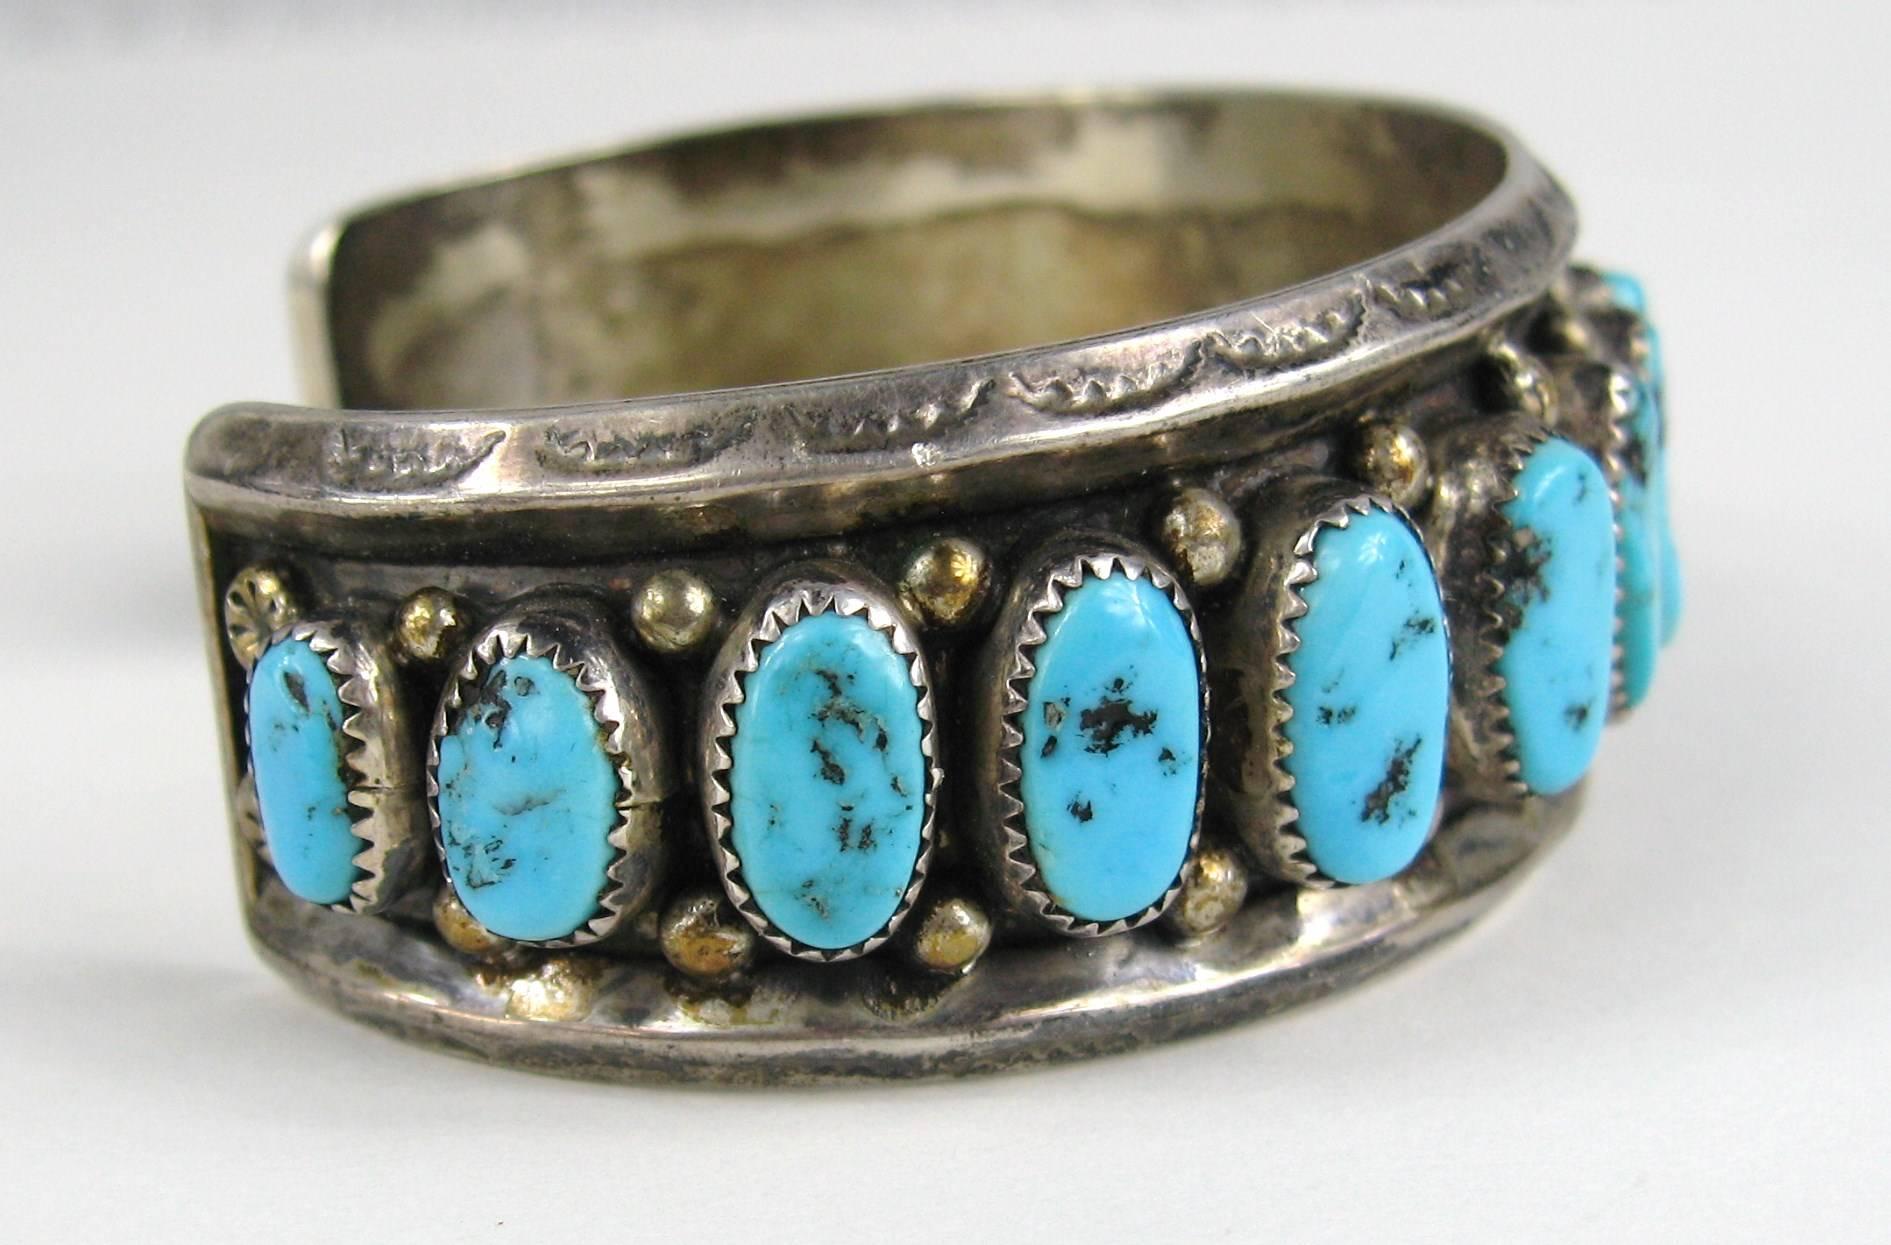 Another fabulous Hand Crafted Sleeping Beauty Navajo sterling silver Turquoise cuff. Any questions please call, email or hit request more information.
Measuring 1.15